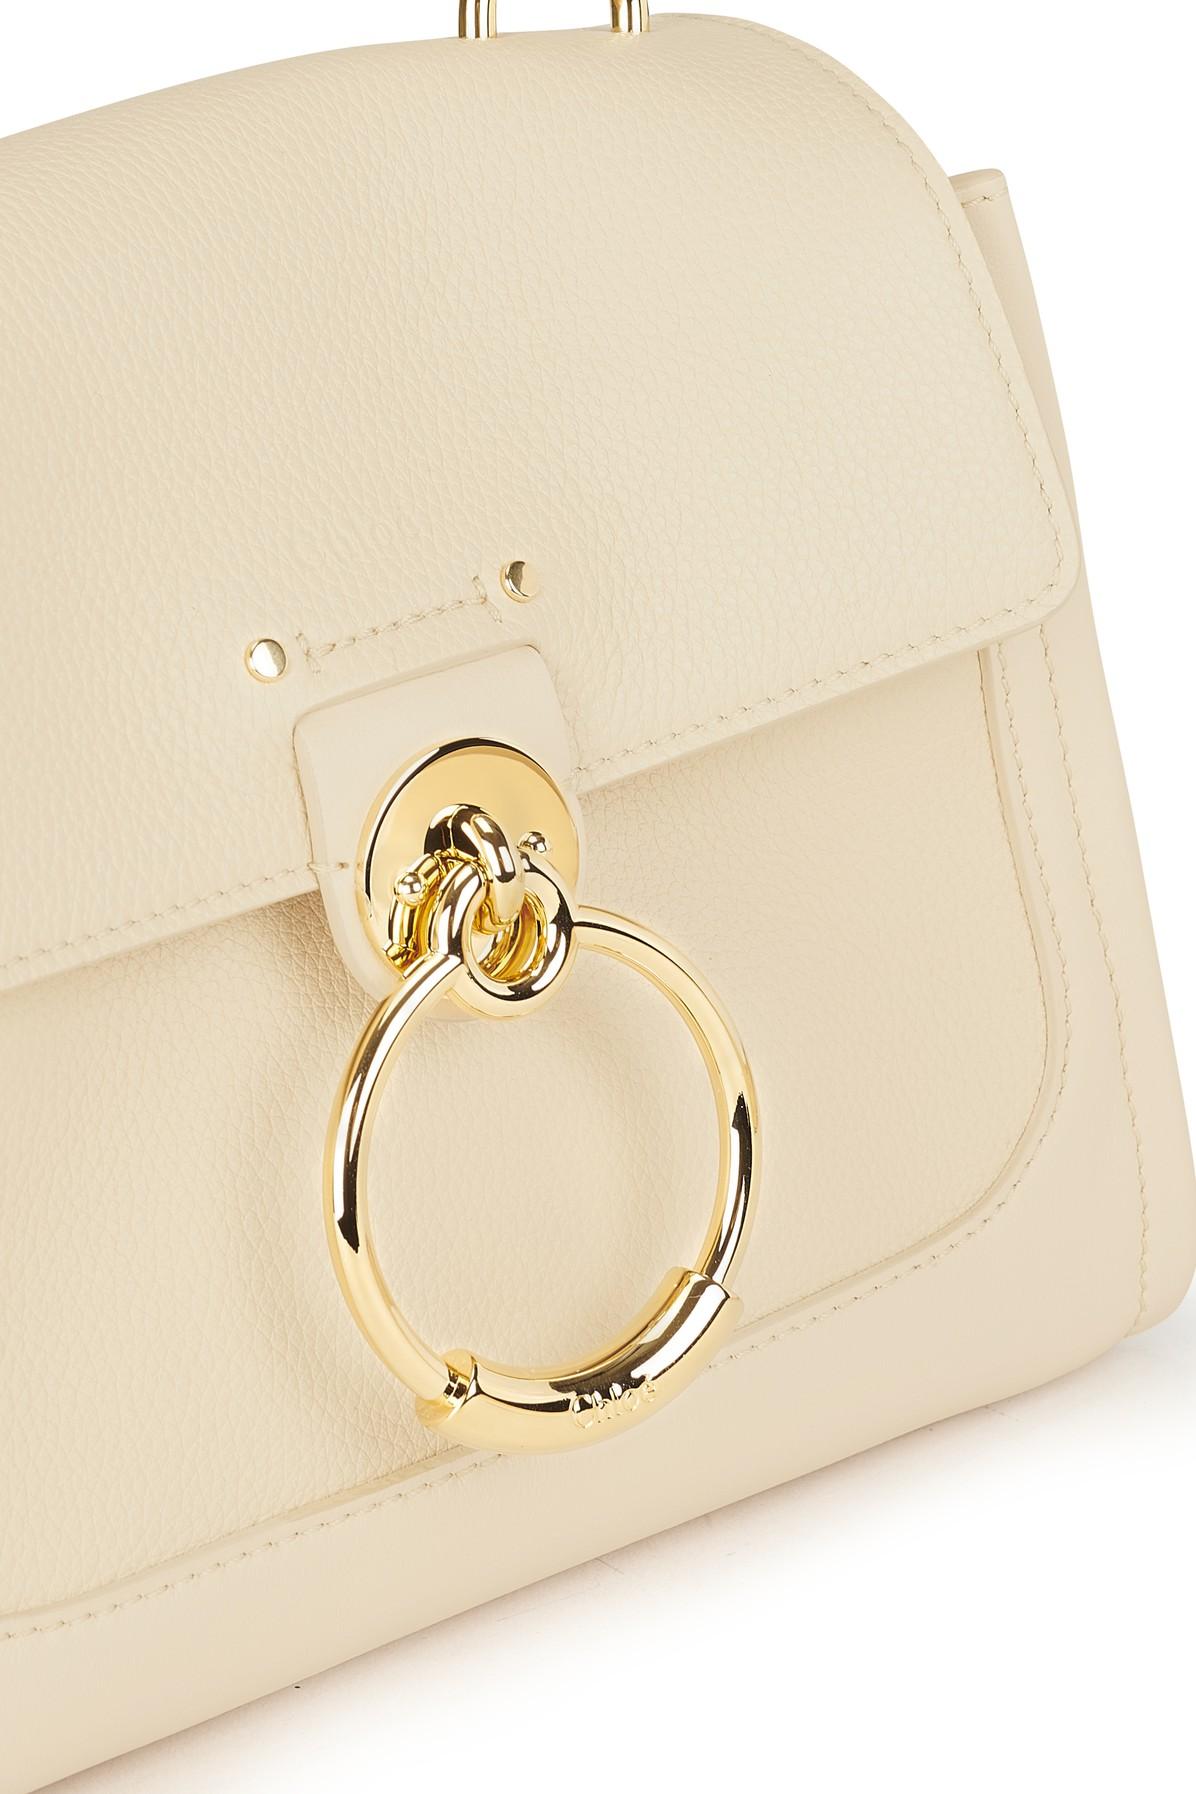 Chloé Leather Mini Tess Day Bag in Beige (Natural) | Lyst